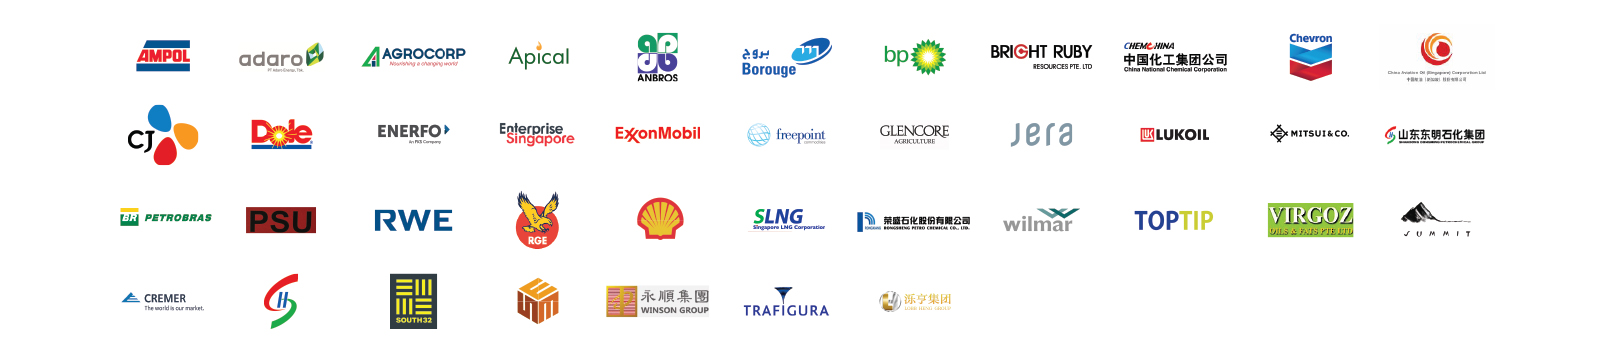 Logos of CEIT’s various industry partners, including Dole, BP, Chevron, and Adaro